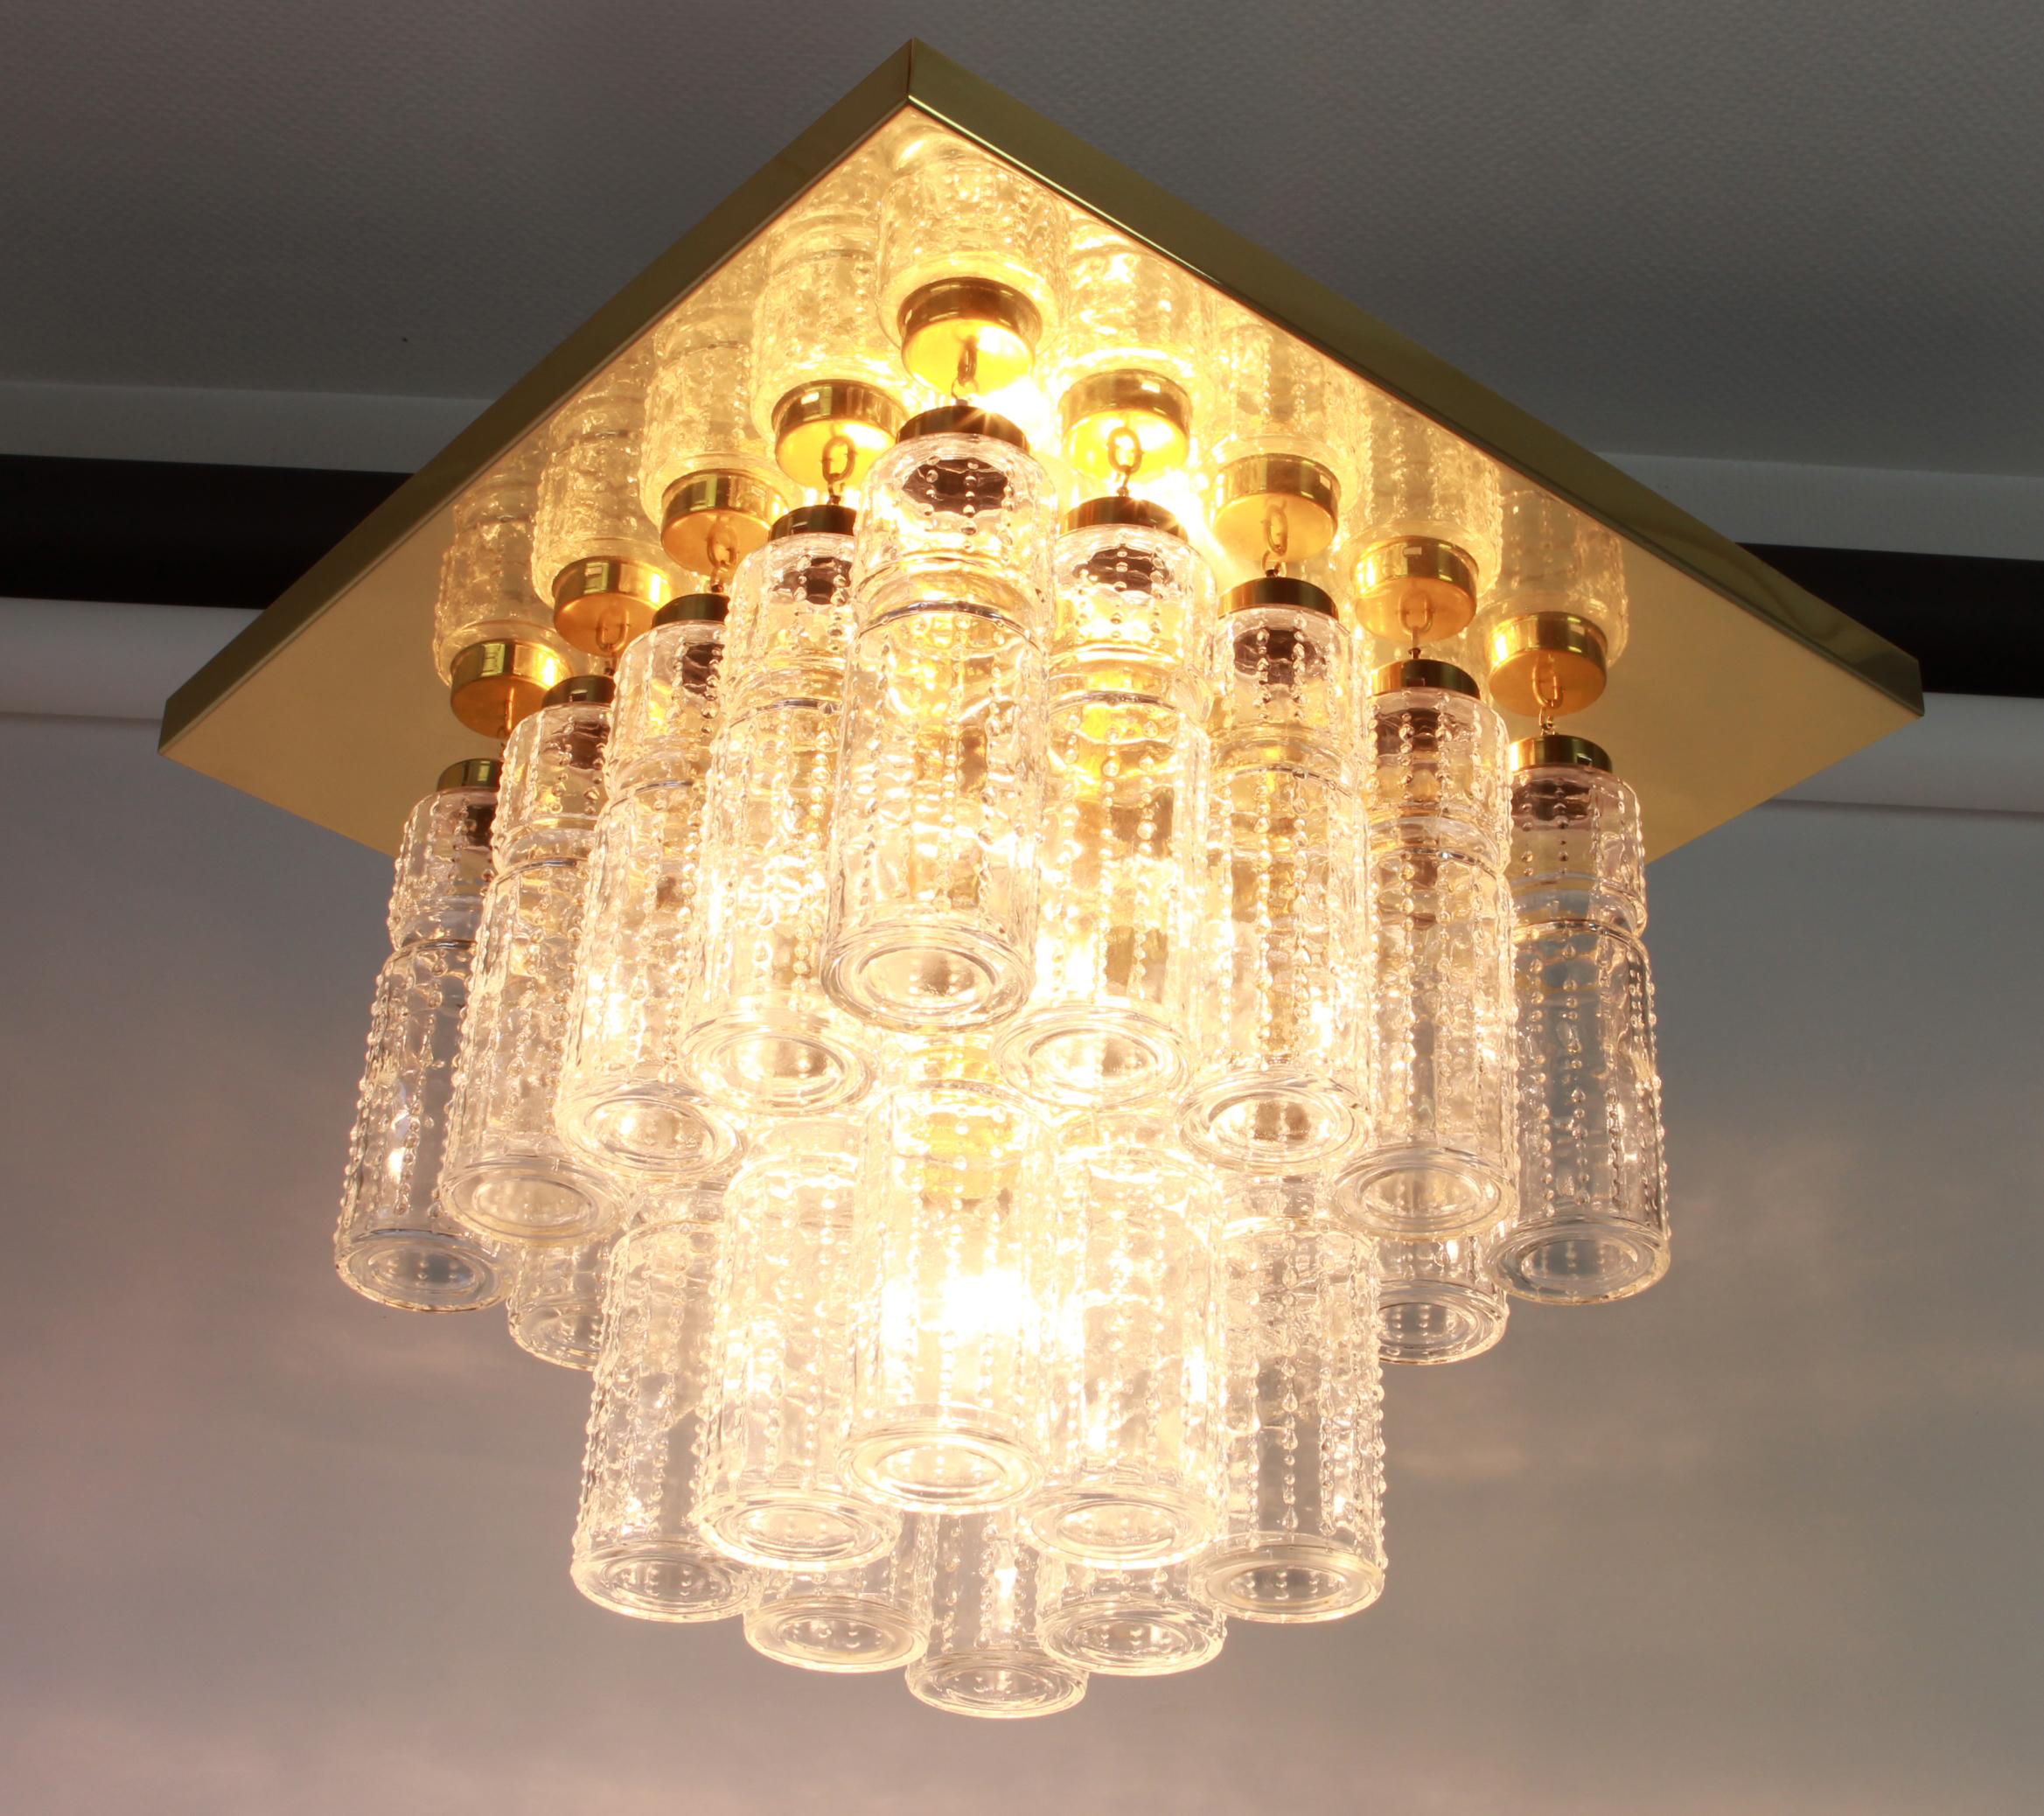 Rare two-tier flushmount or chandelier with hand blown glass pieces on a brass base made by Glashütte Limburg.

Heavy quality and in very good condition. Cleaned, well-wired and ready to use. The fixture requires 5 x E27 standard bulbs with 60W